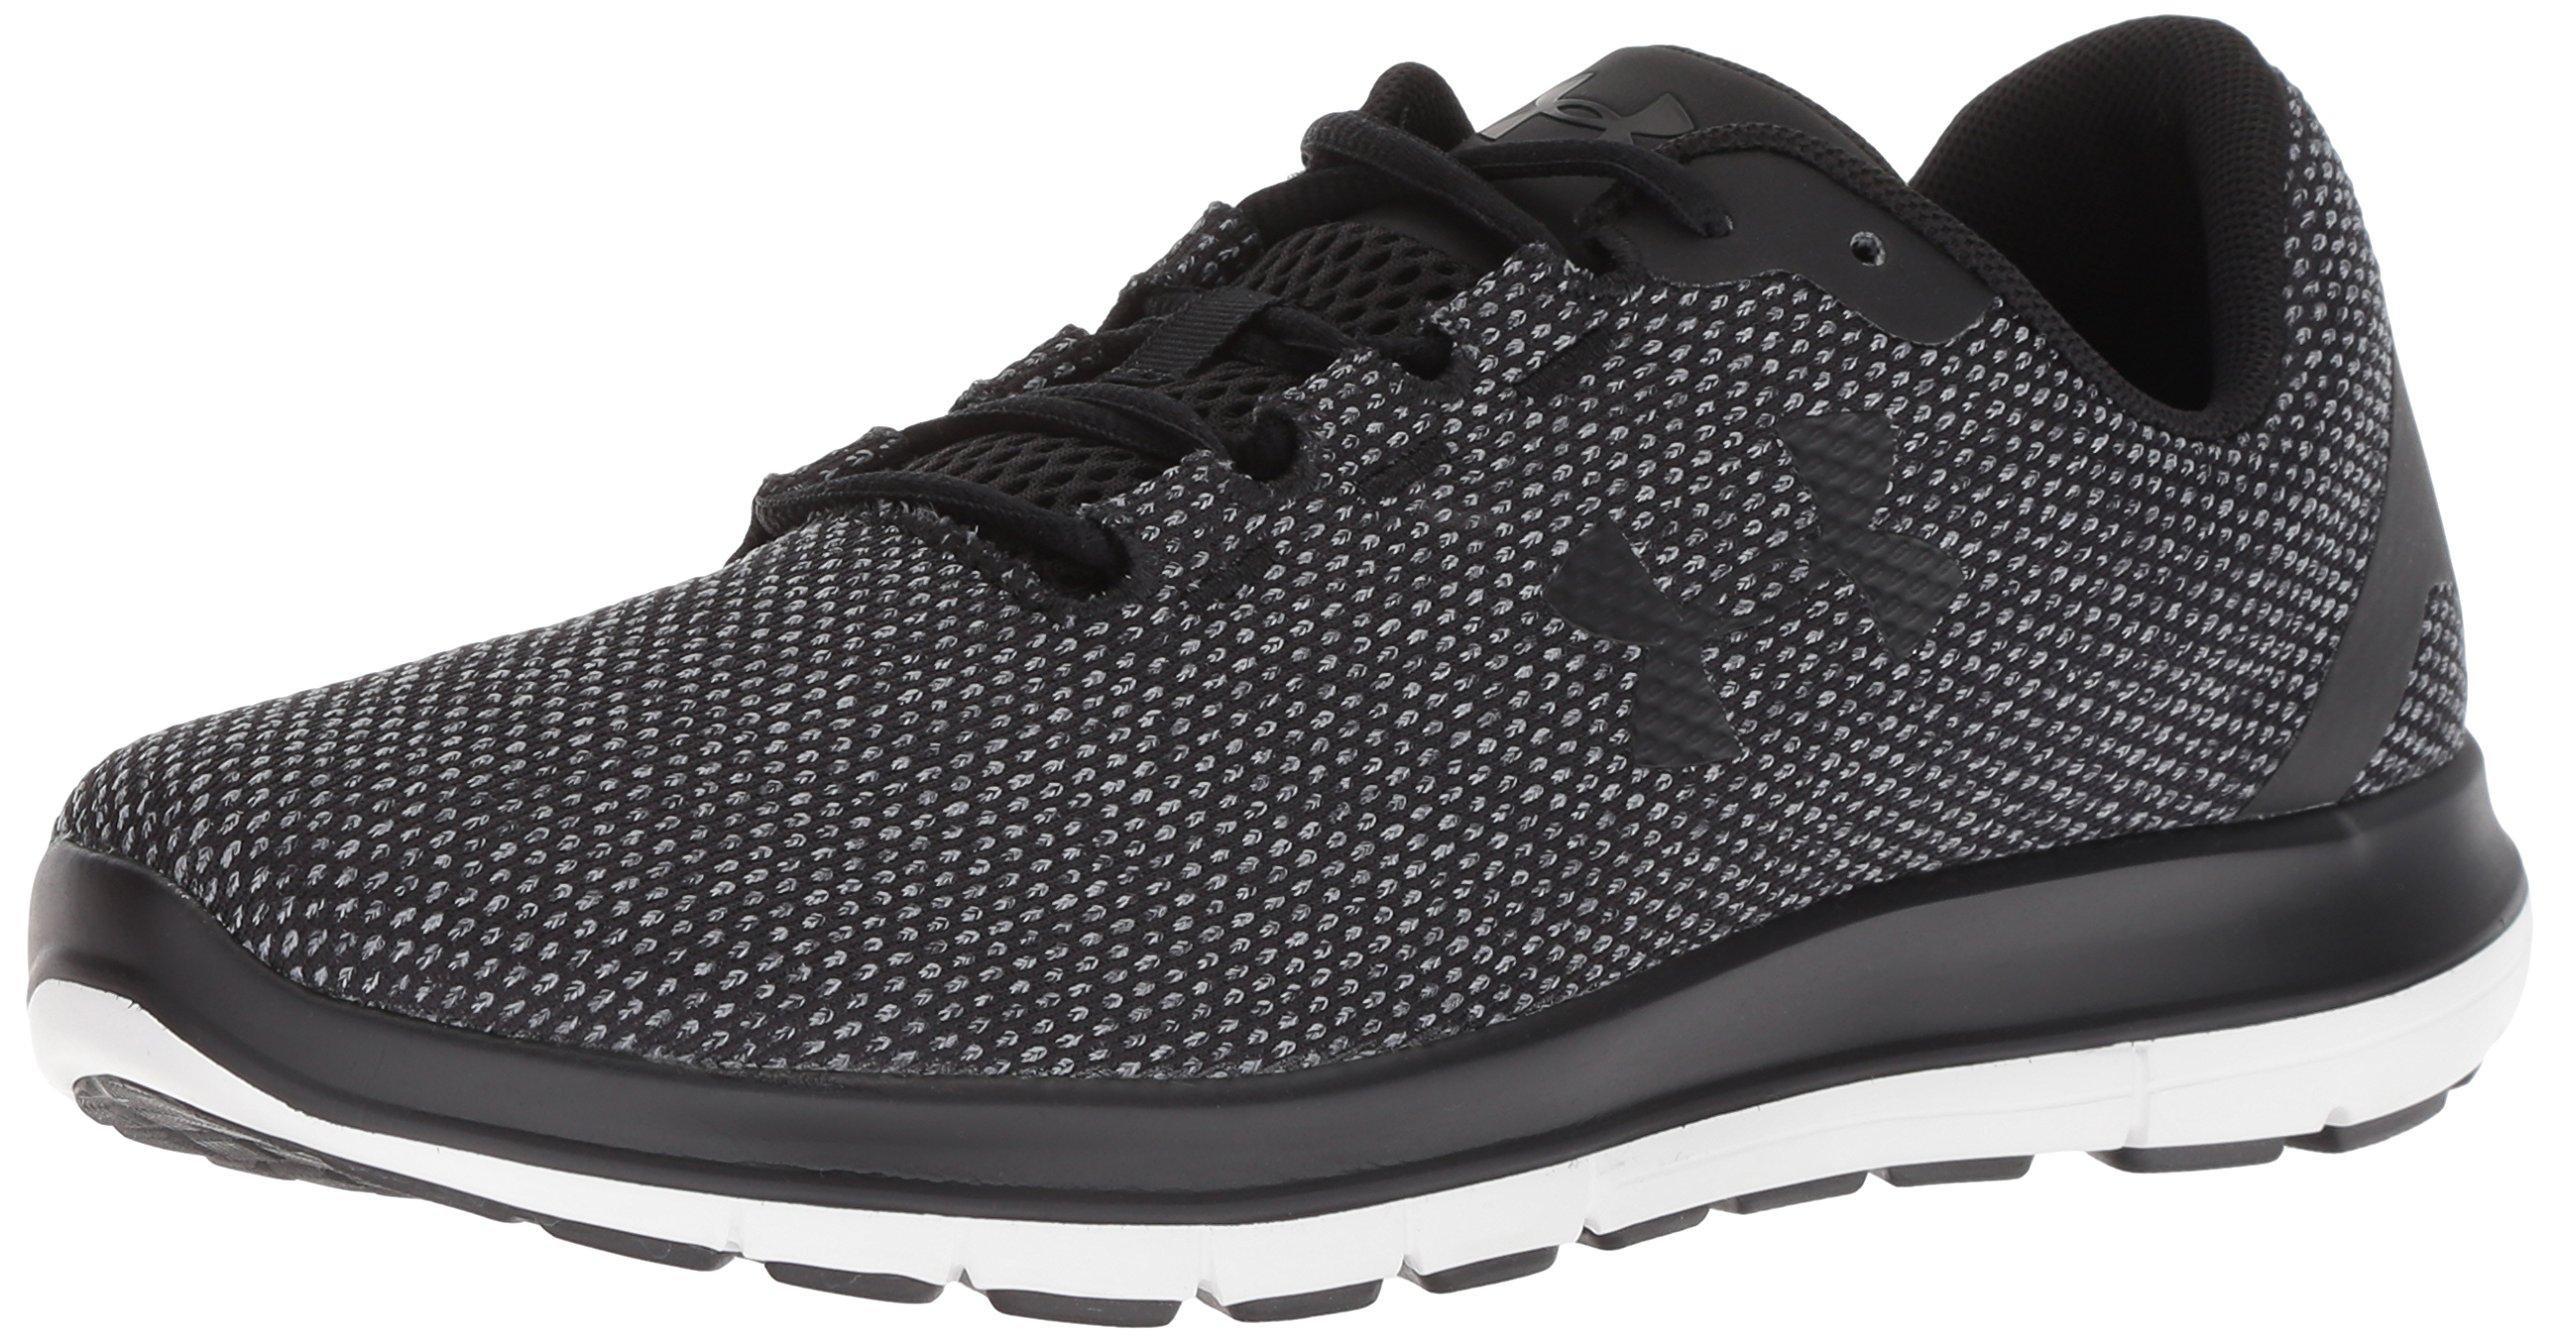 Under Armour Mens UA Remix Running Trainers Gym Sports Training Shoes 